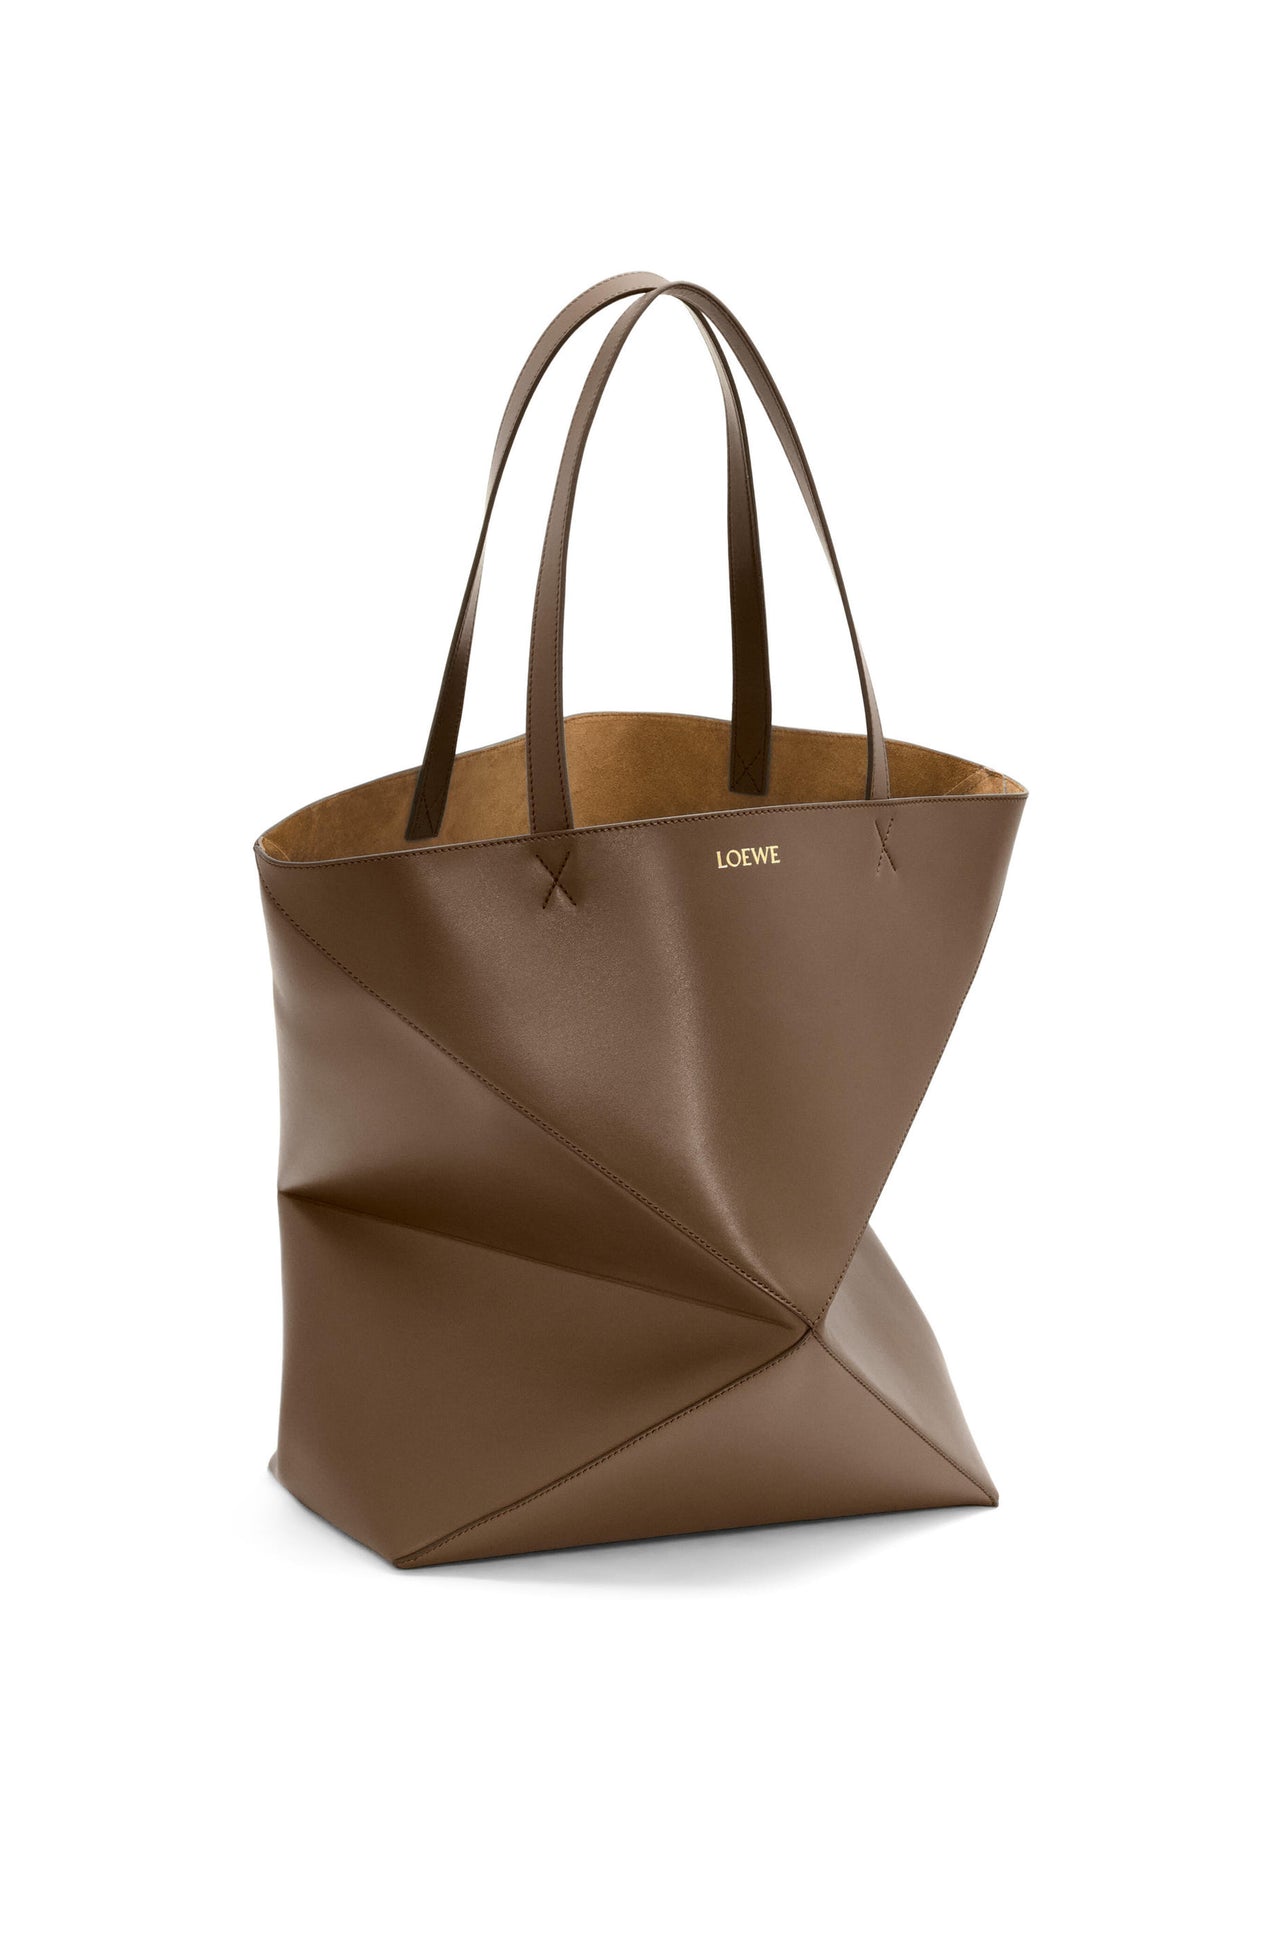 Loewe Large Puzzle Fold Tote in shiny calfskin (Colour: Umber)